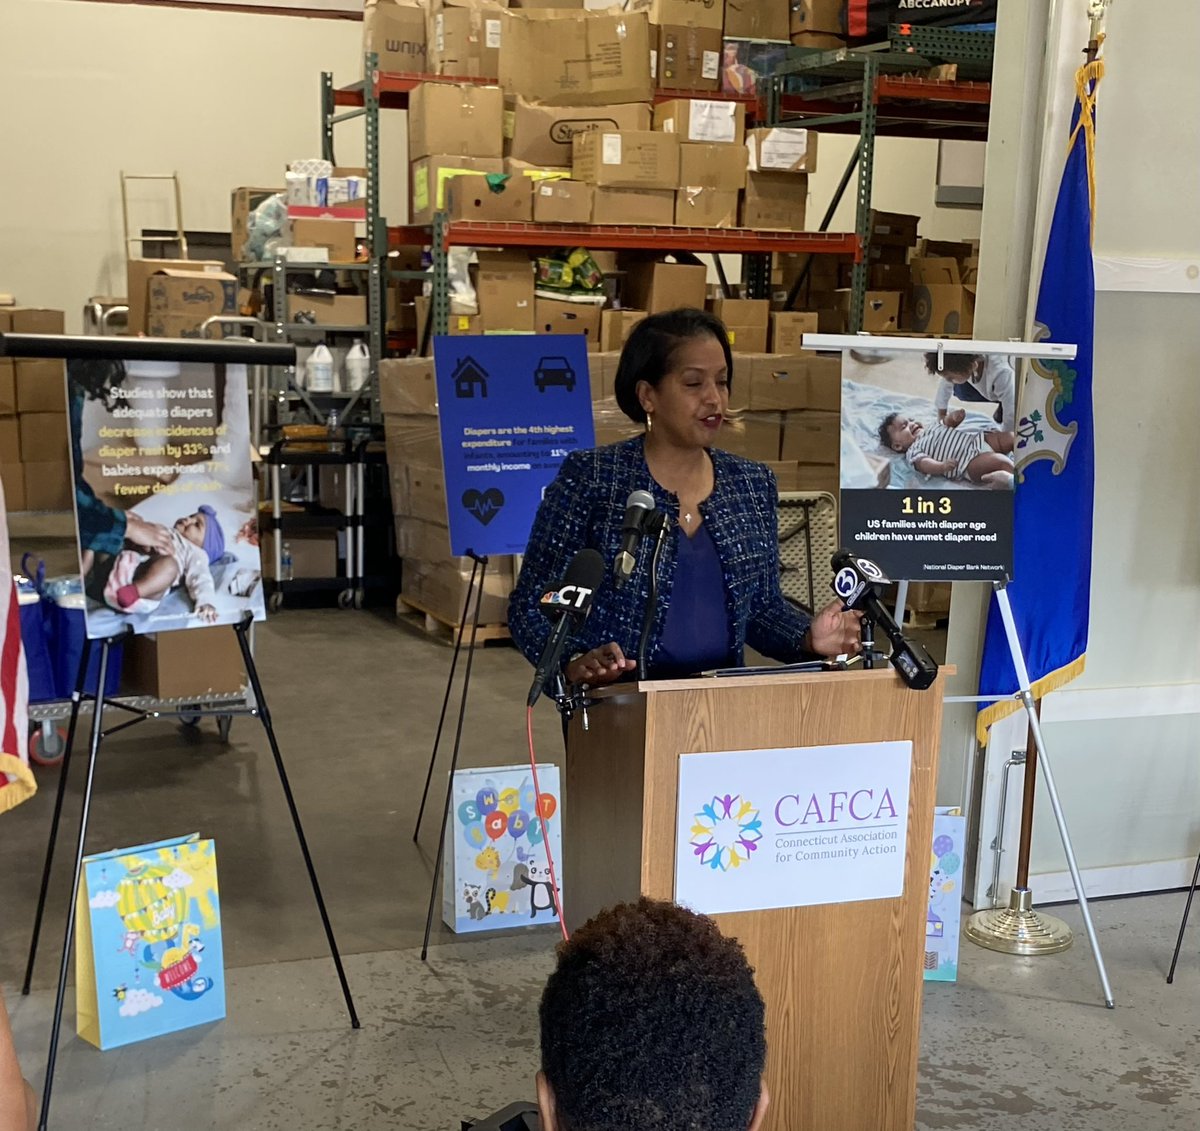 $1.2M in federal funds have been awarded to the CT Association for Community Action to launch the Diaper Distribution Demonstration and Research Pilot program in CT 1 in 3 families in the U.S. do not have enough diapers for their children- this vital program will help families